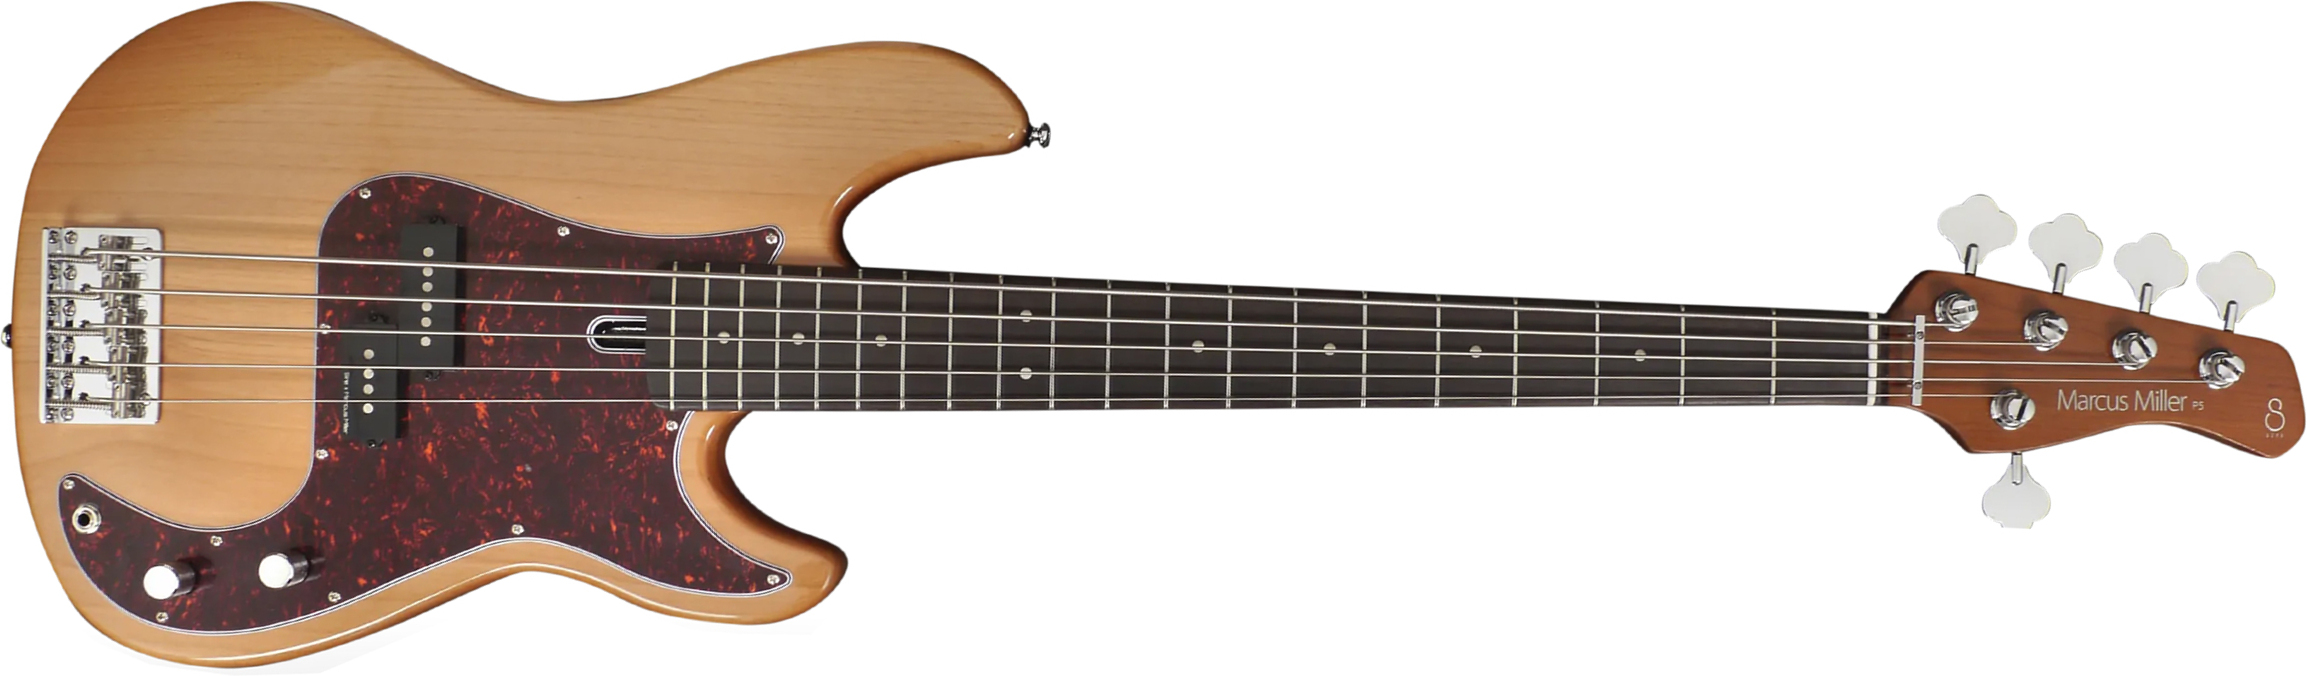 Marcus Miller P5r 5st 5c Rw - Natural - Solid body electric bass - Main picture